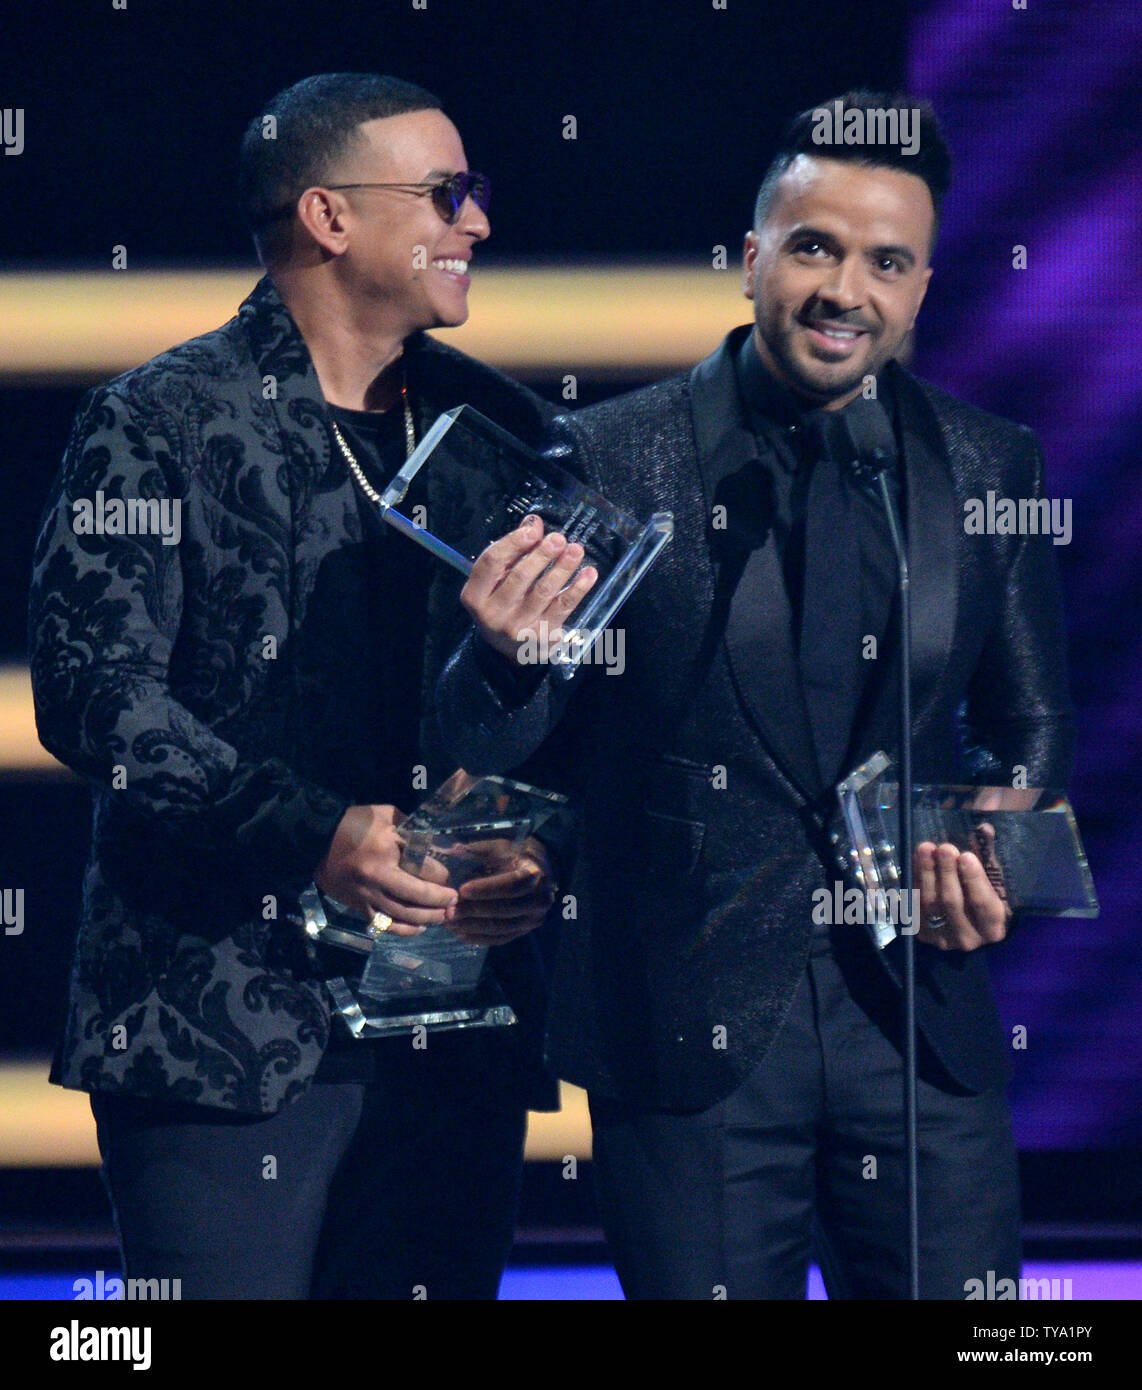 L-R) Daddy Yankee and Luis Fonsi accept the award for Latin Pop Song of the  Year for "Despacito" onstage during the 2018 Billboard Latin Music Awards  at the Mandalay Bay Events Center